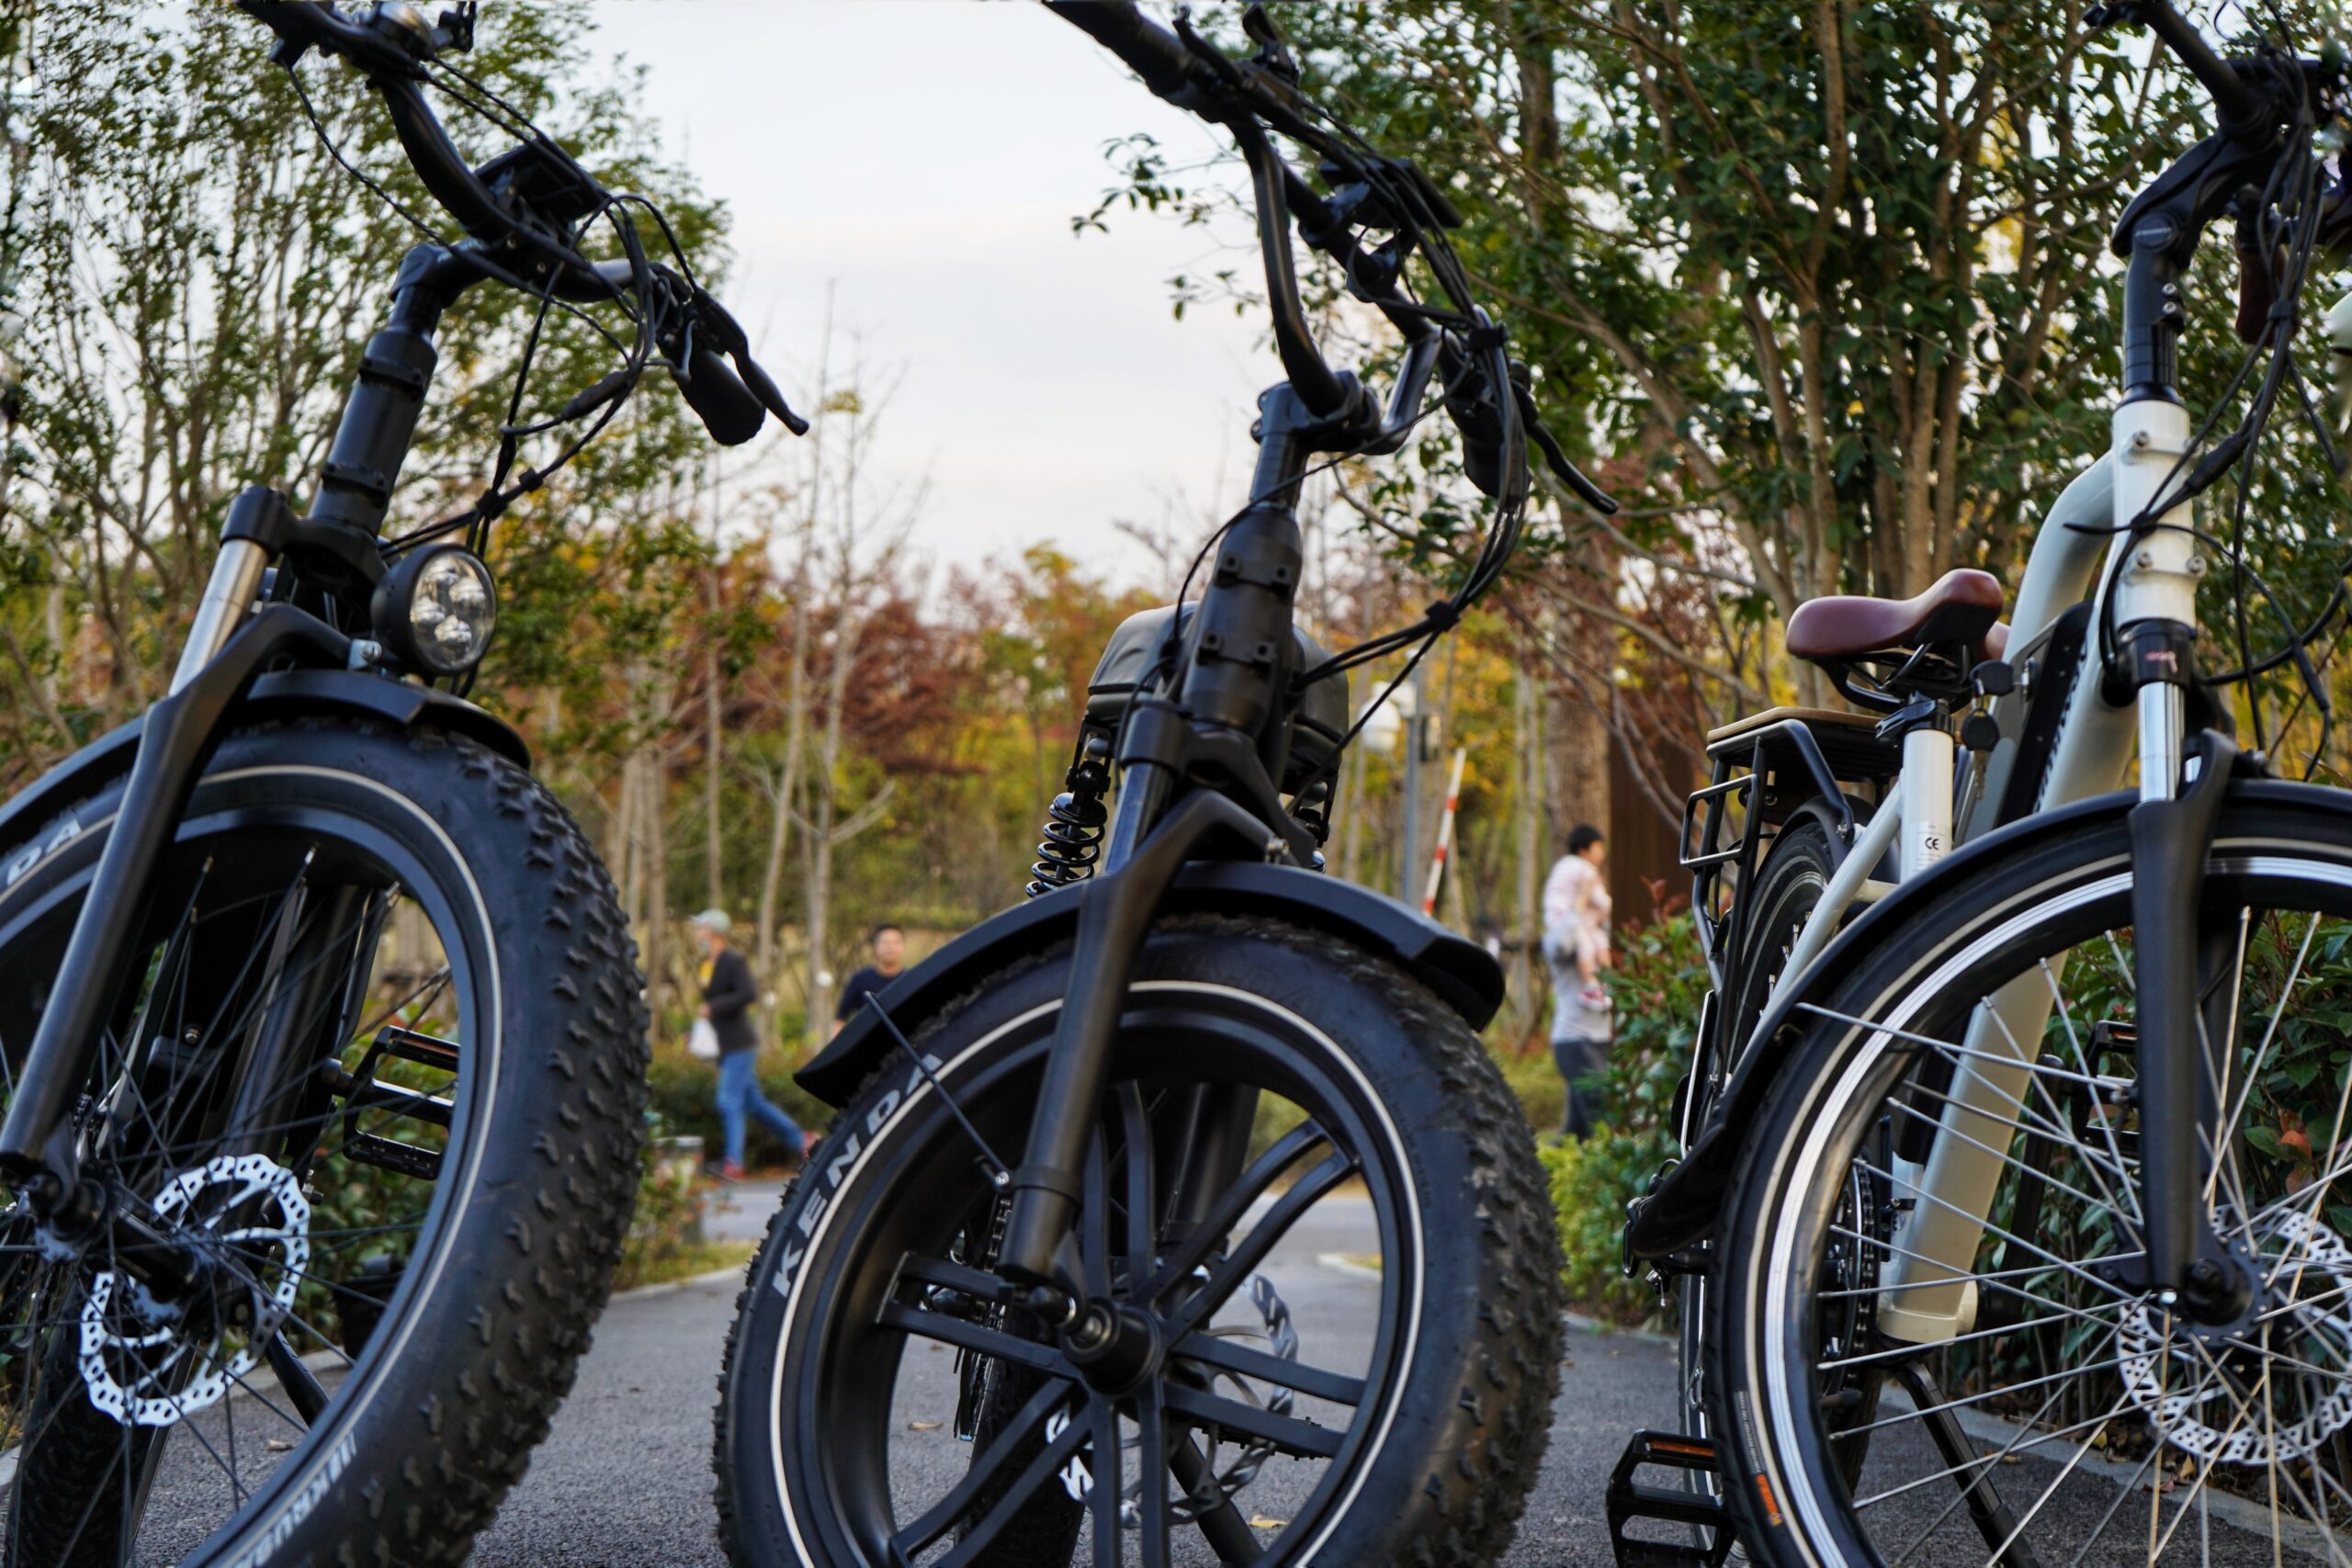 Three electric bikes parked on their stands. Two are black and one is white, on a concrete path lined with trees both sides.